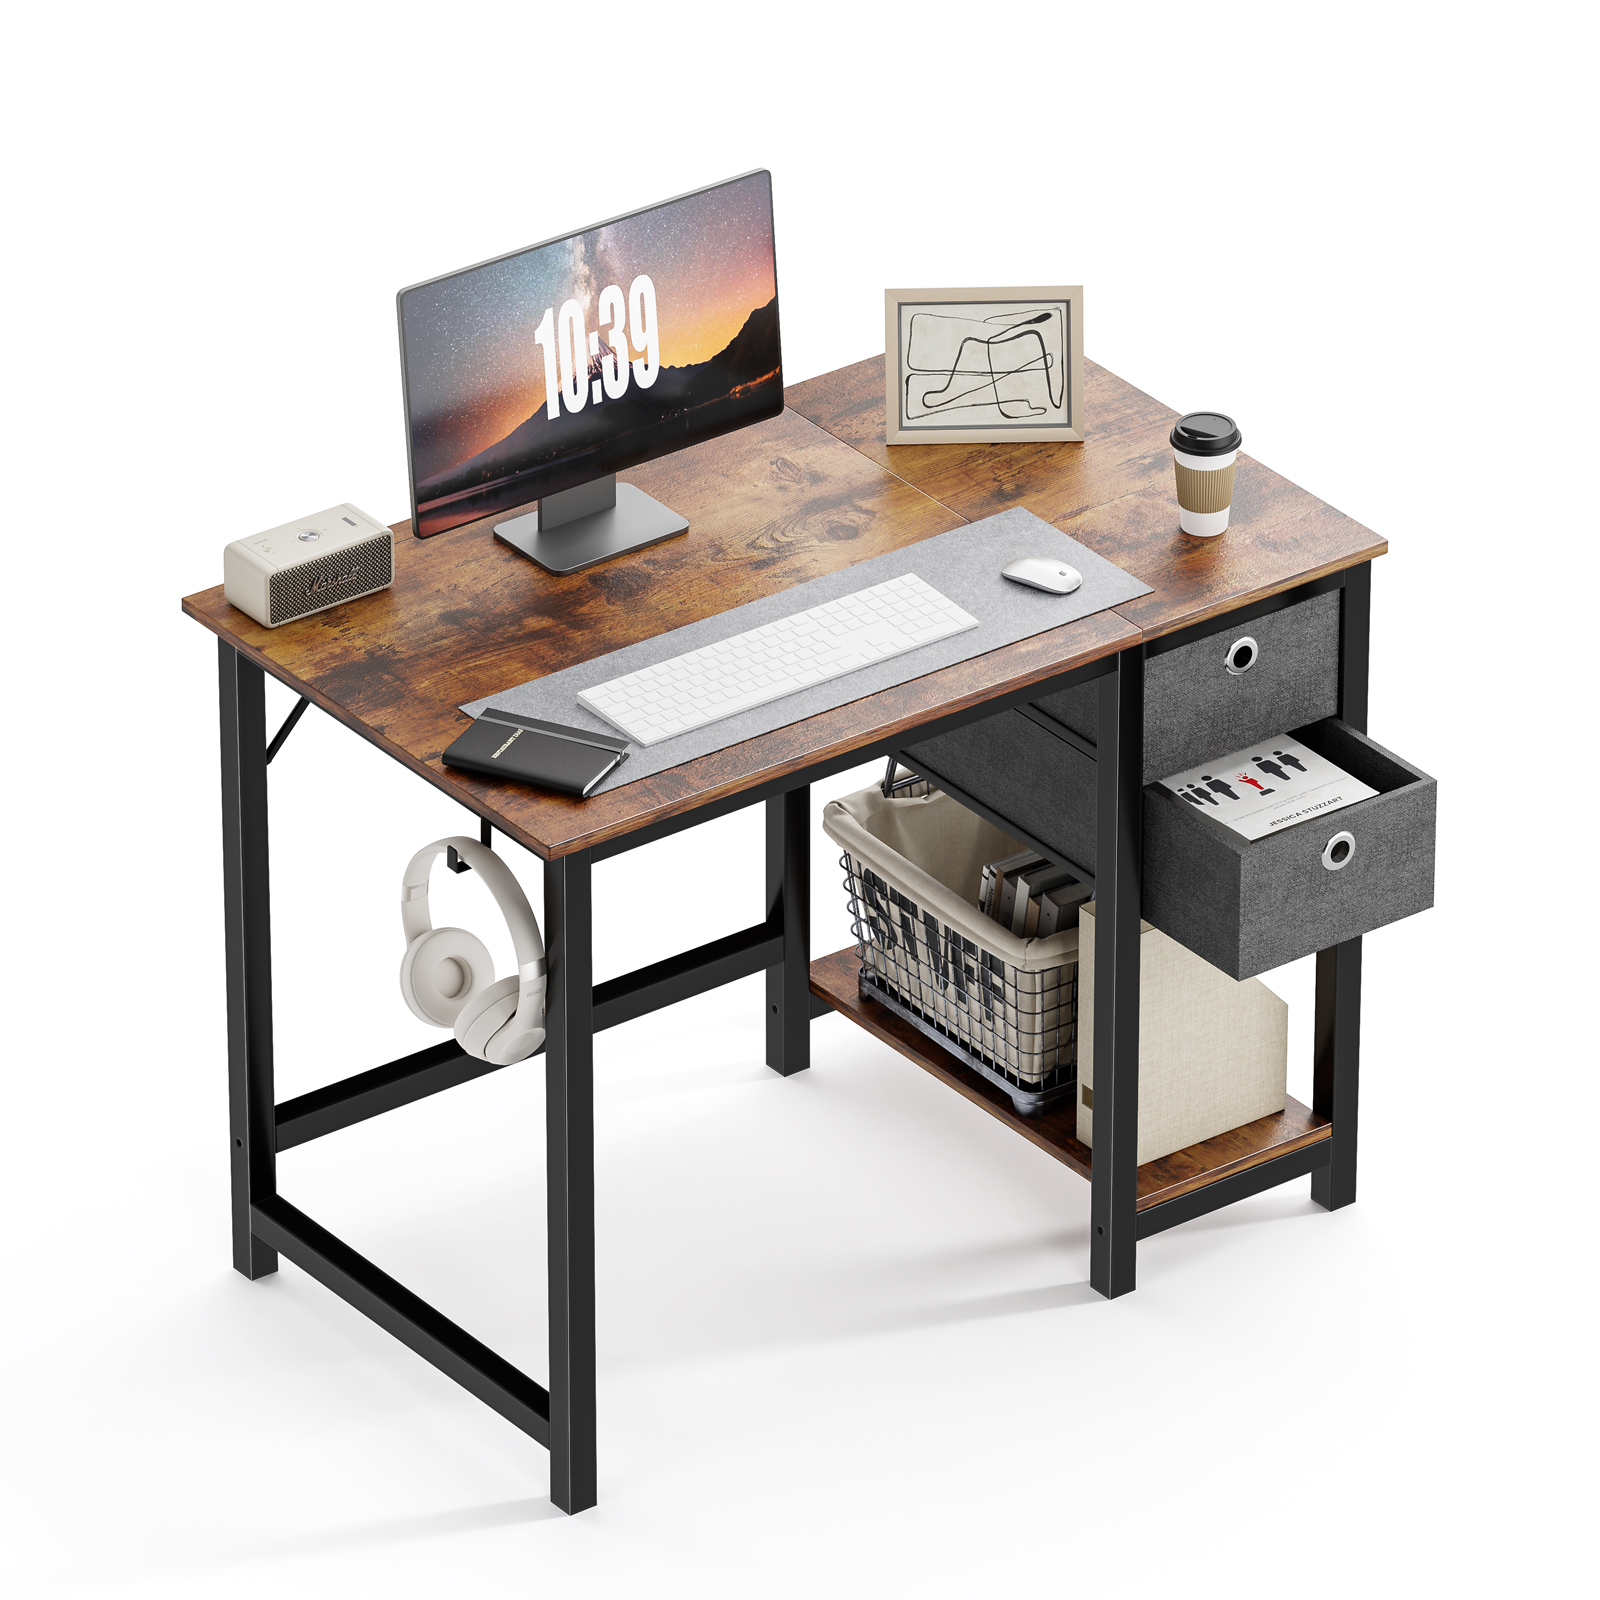 edx Computer Desk with Drawer 40 Inch PC Table Study Desk with 2-Tier Drawers Storage Shelf Headphone Hook, Modern Simple Style Laptop Desk for Bedroom, Gaming - image 1 of 7